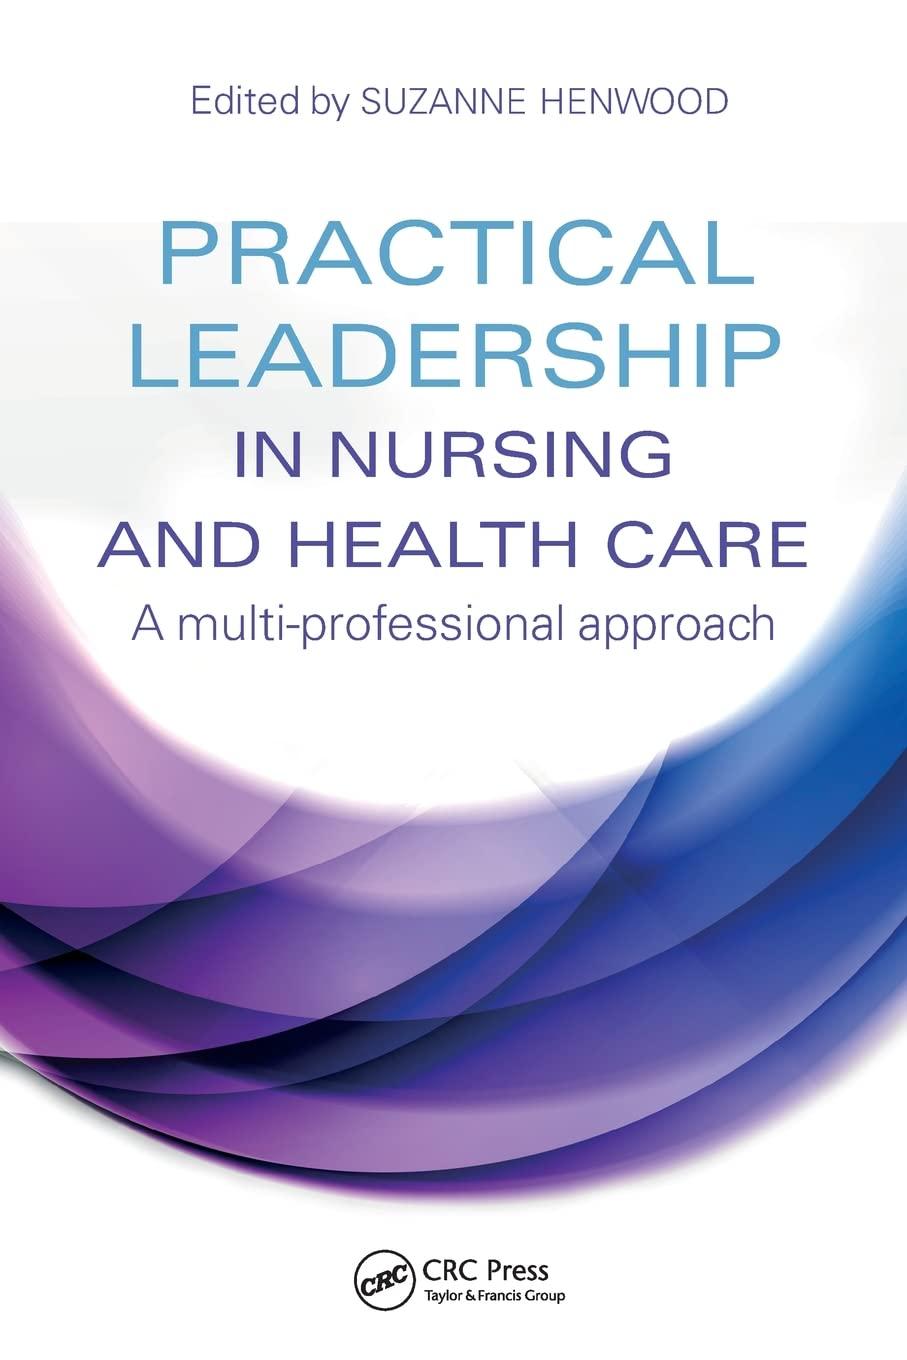 practical leadership in nursing and health care a multi professional approach 1st edition suzanne henwood